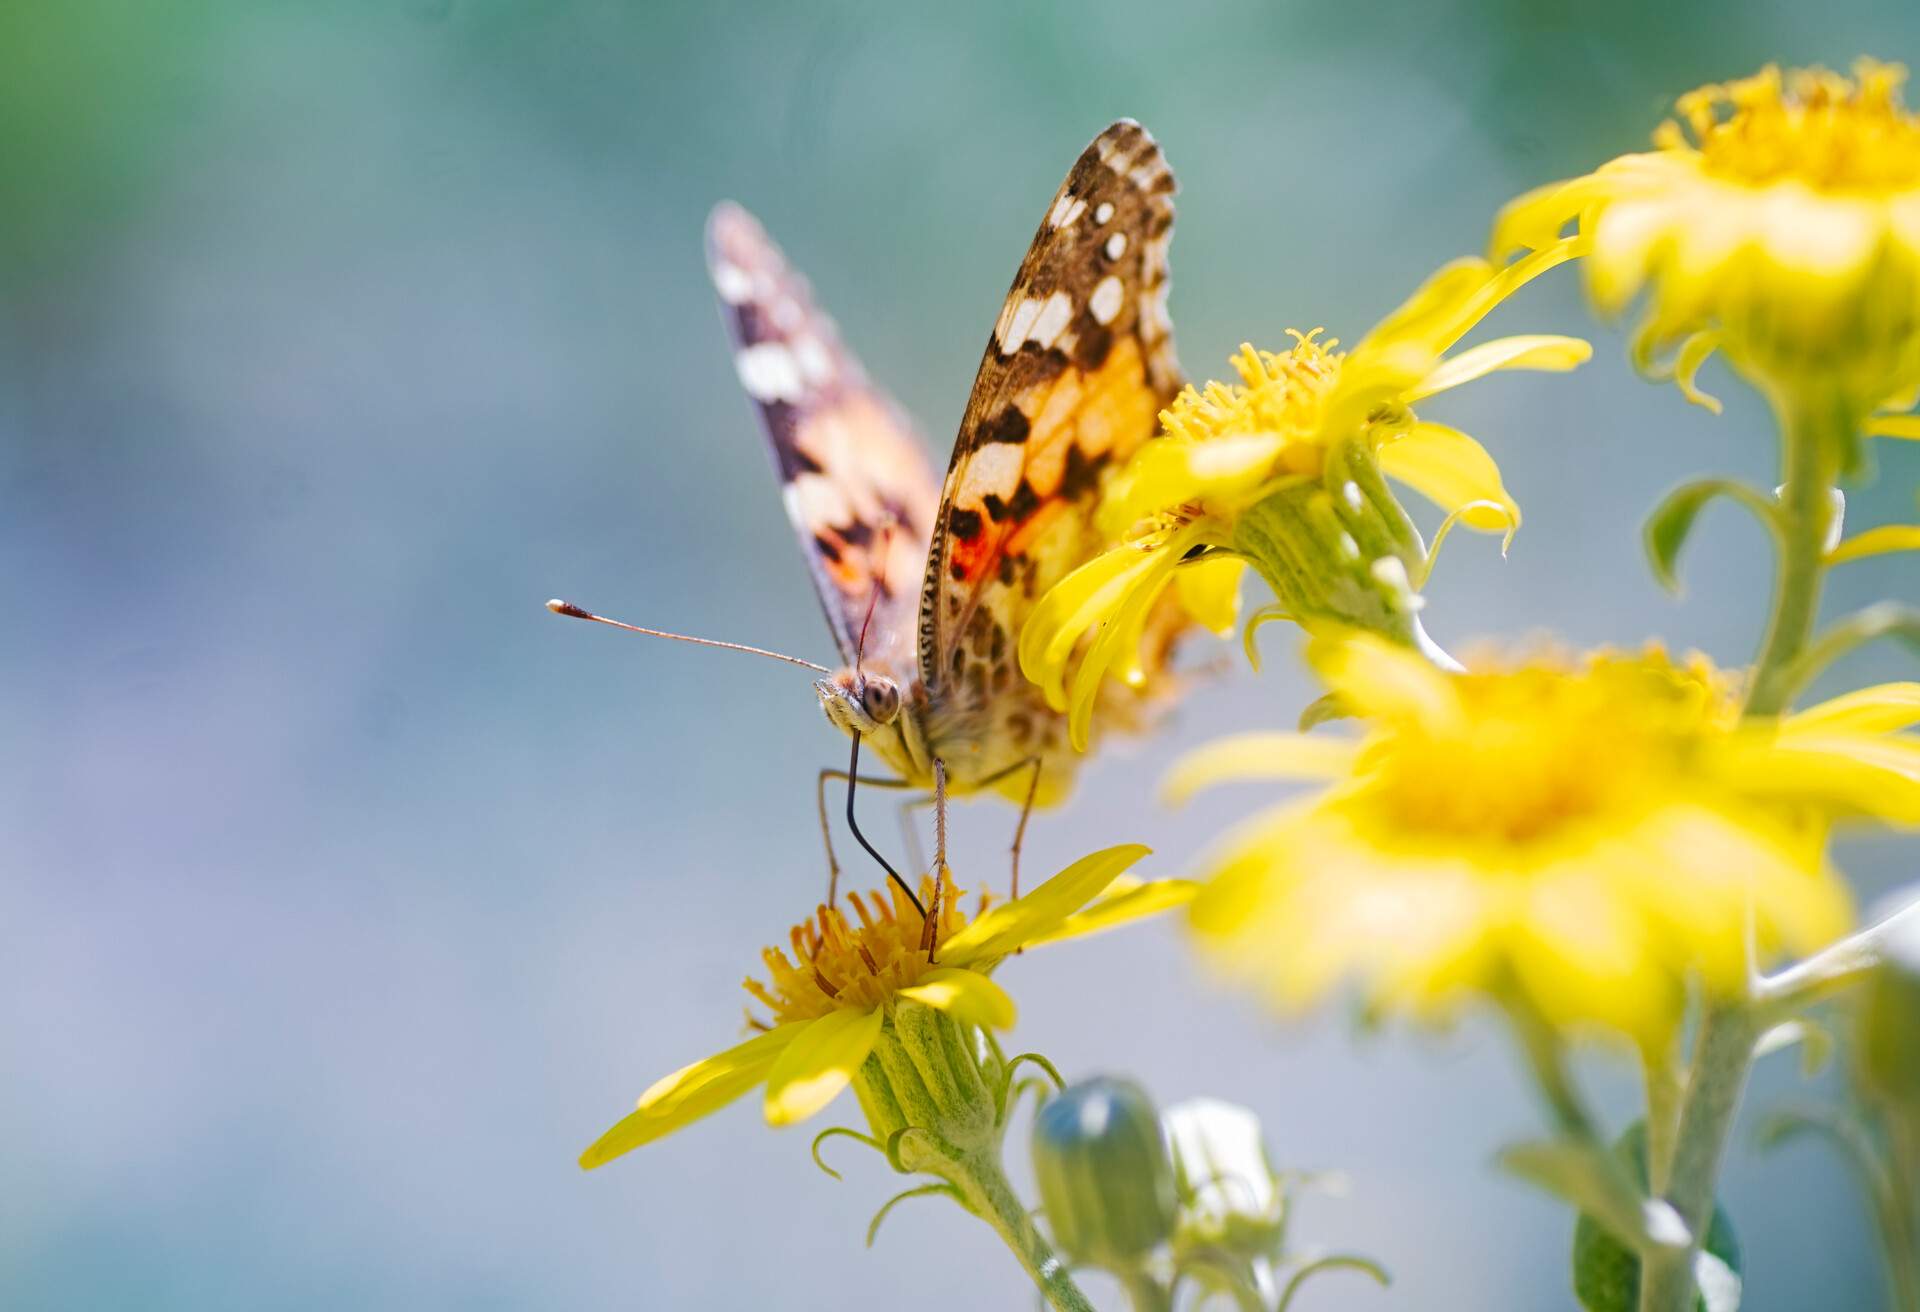 A delicate butterfly alights gracefully on a vibrant flower.